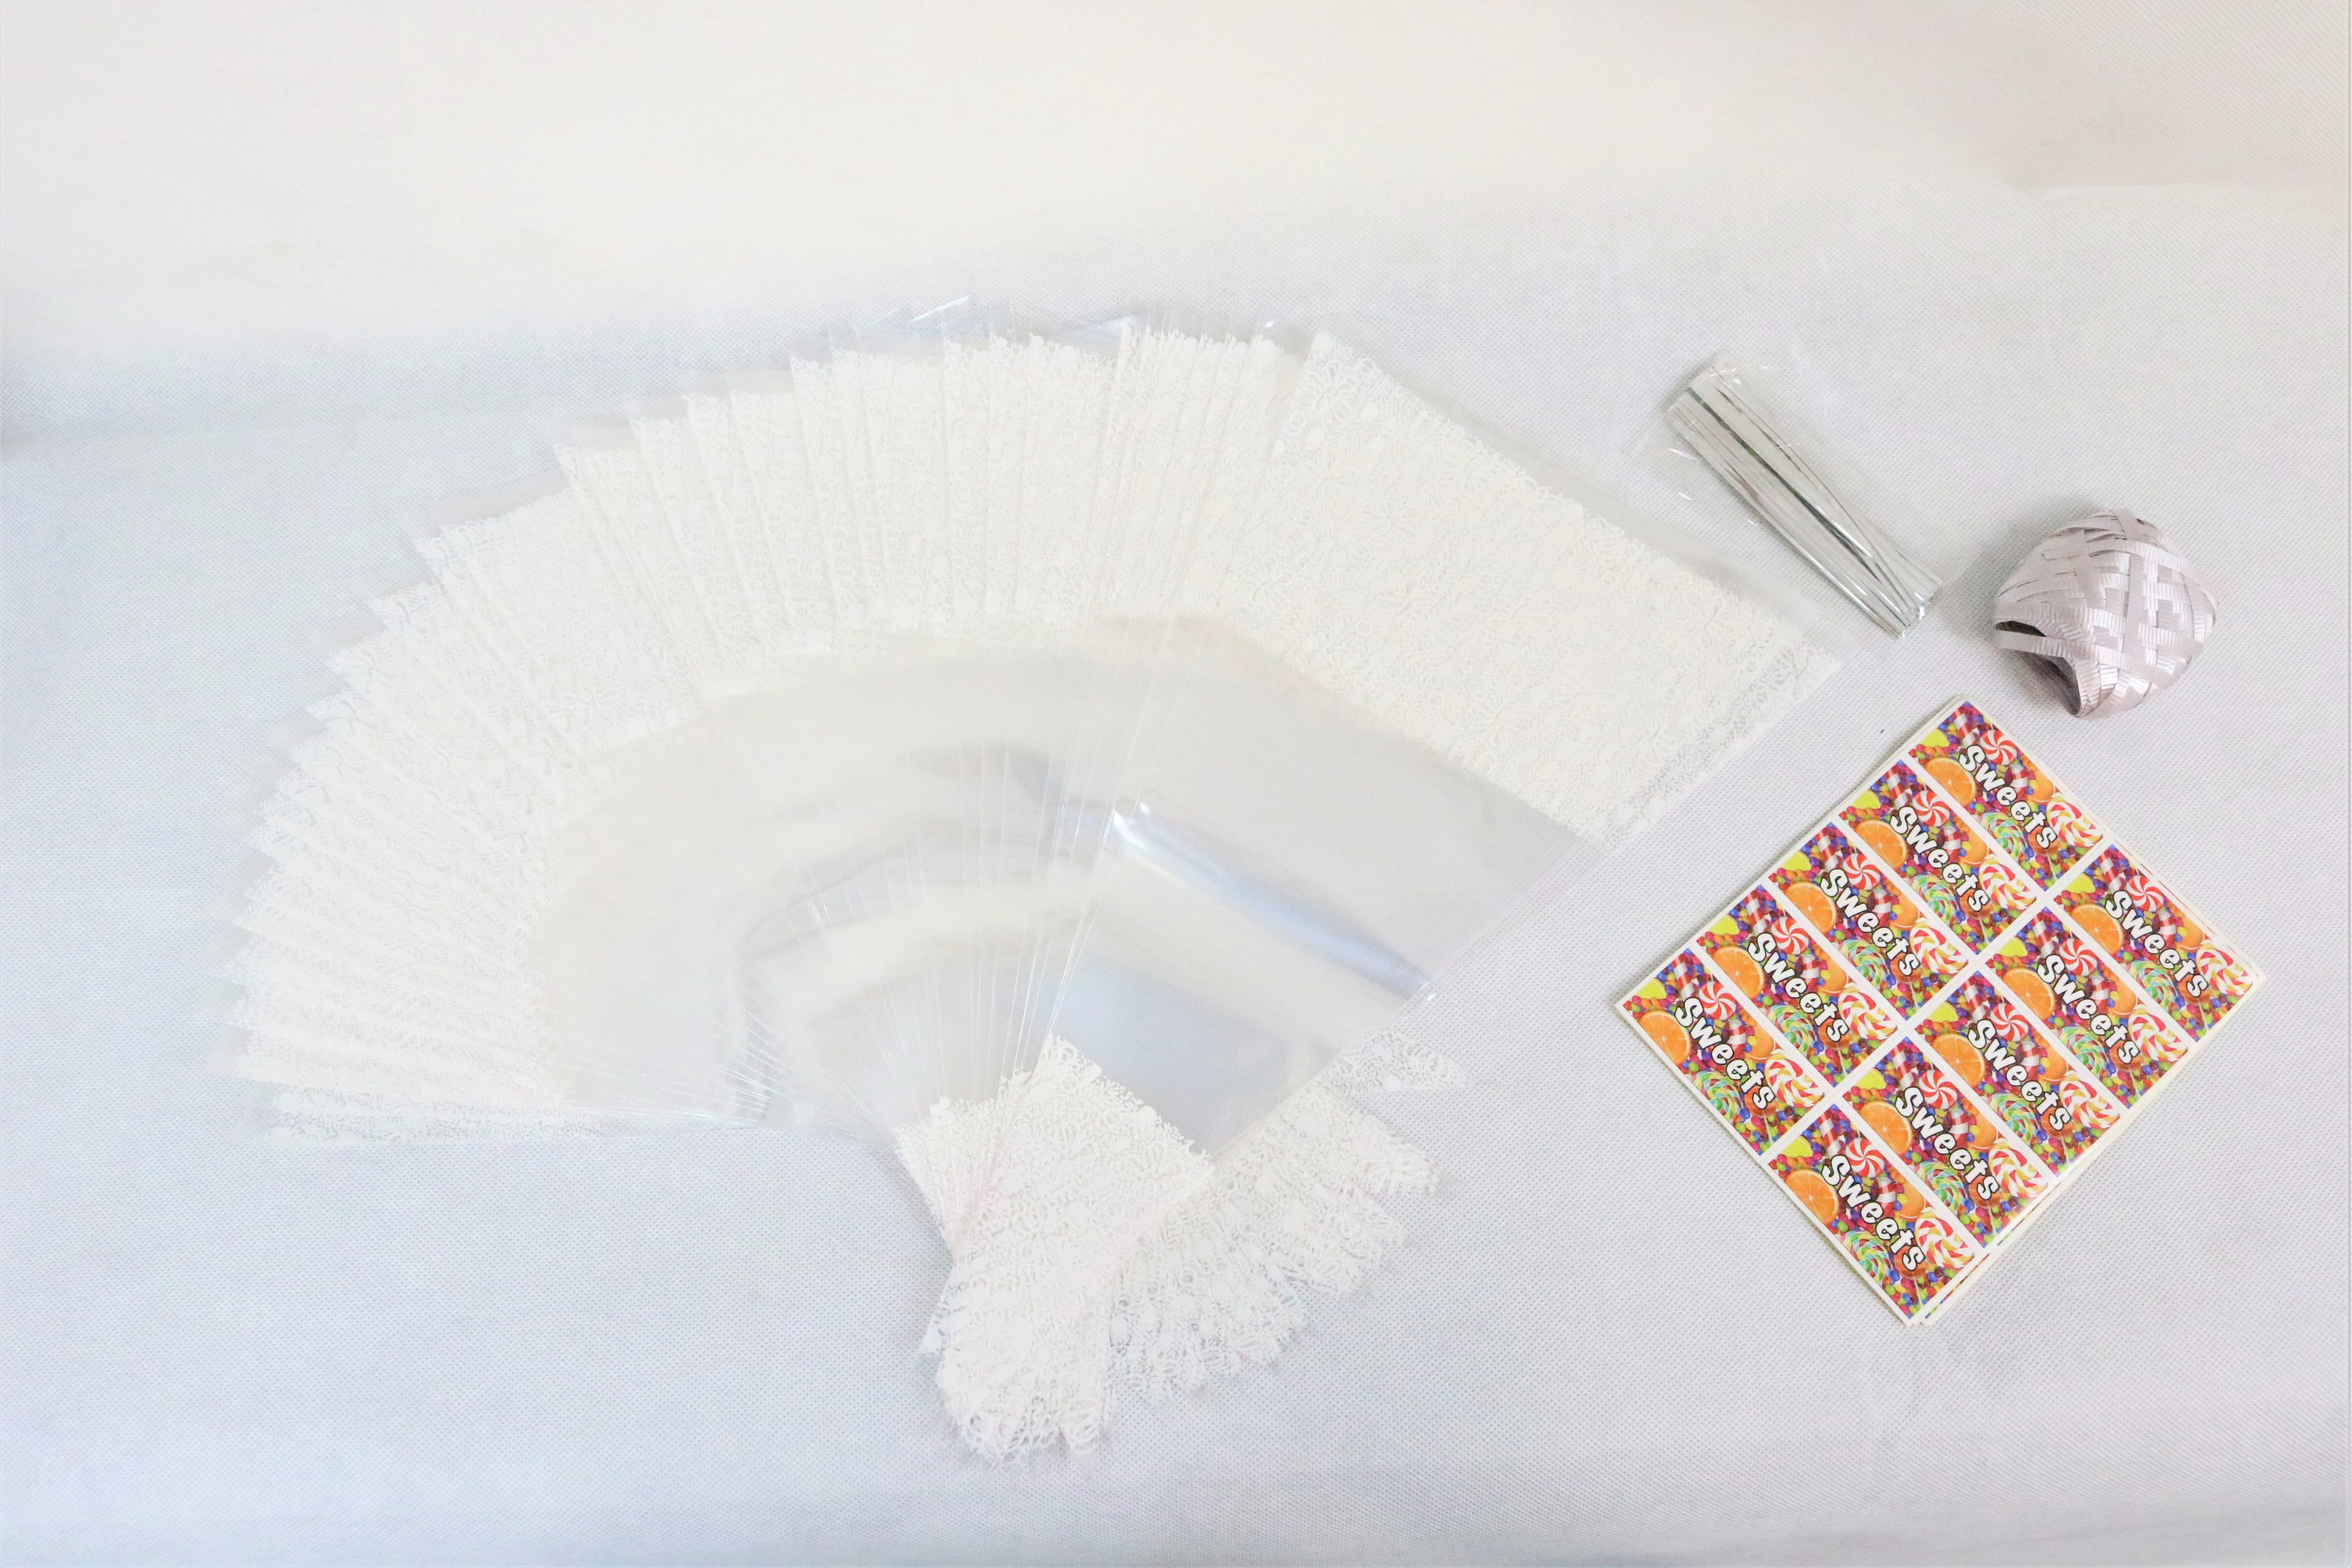 100 x White Decorated Cone Bags With Ribbon Ties & Stickers